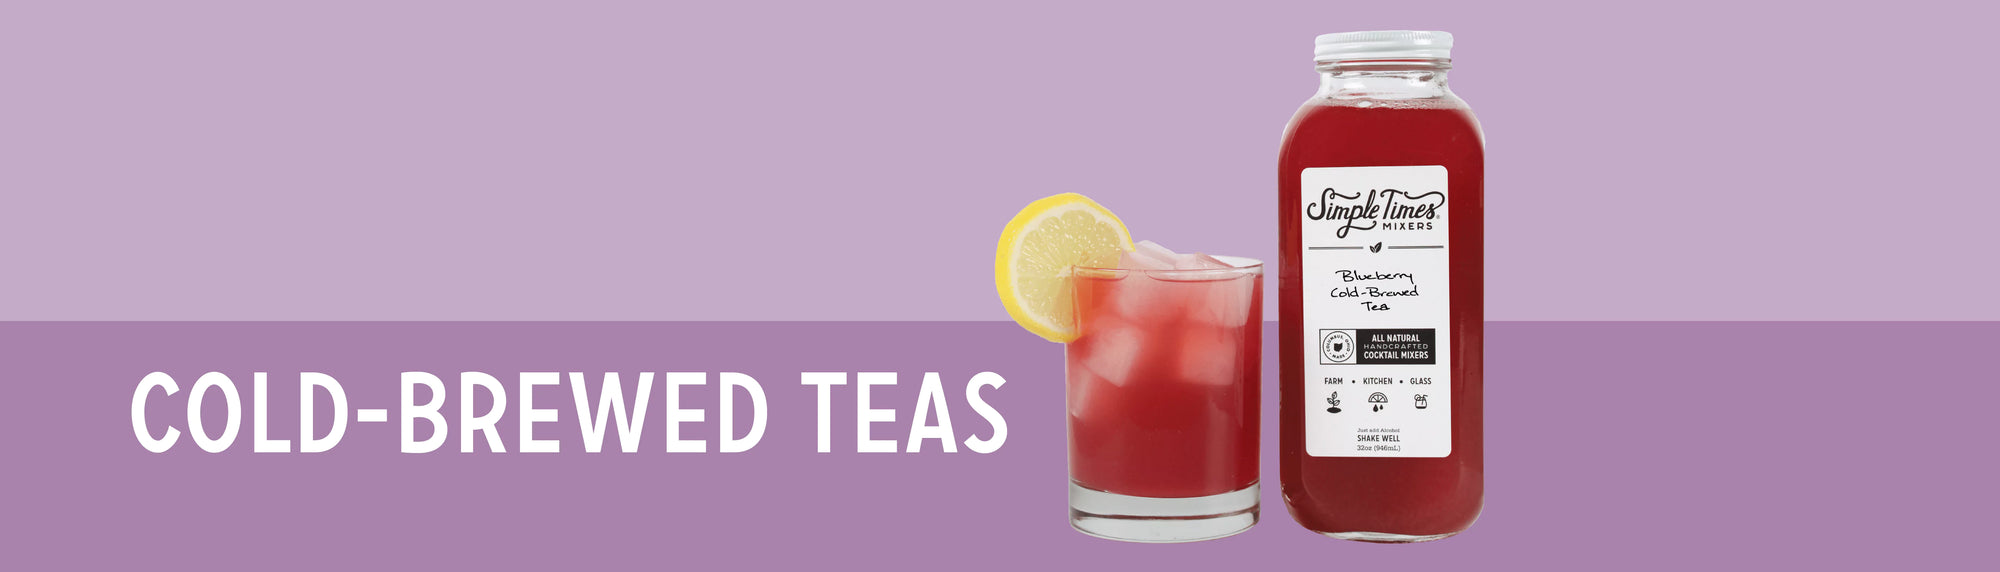 Cold-Brewed Teas Cocktail Mixer Collection